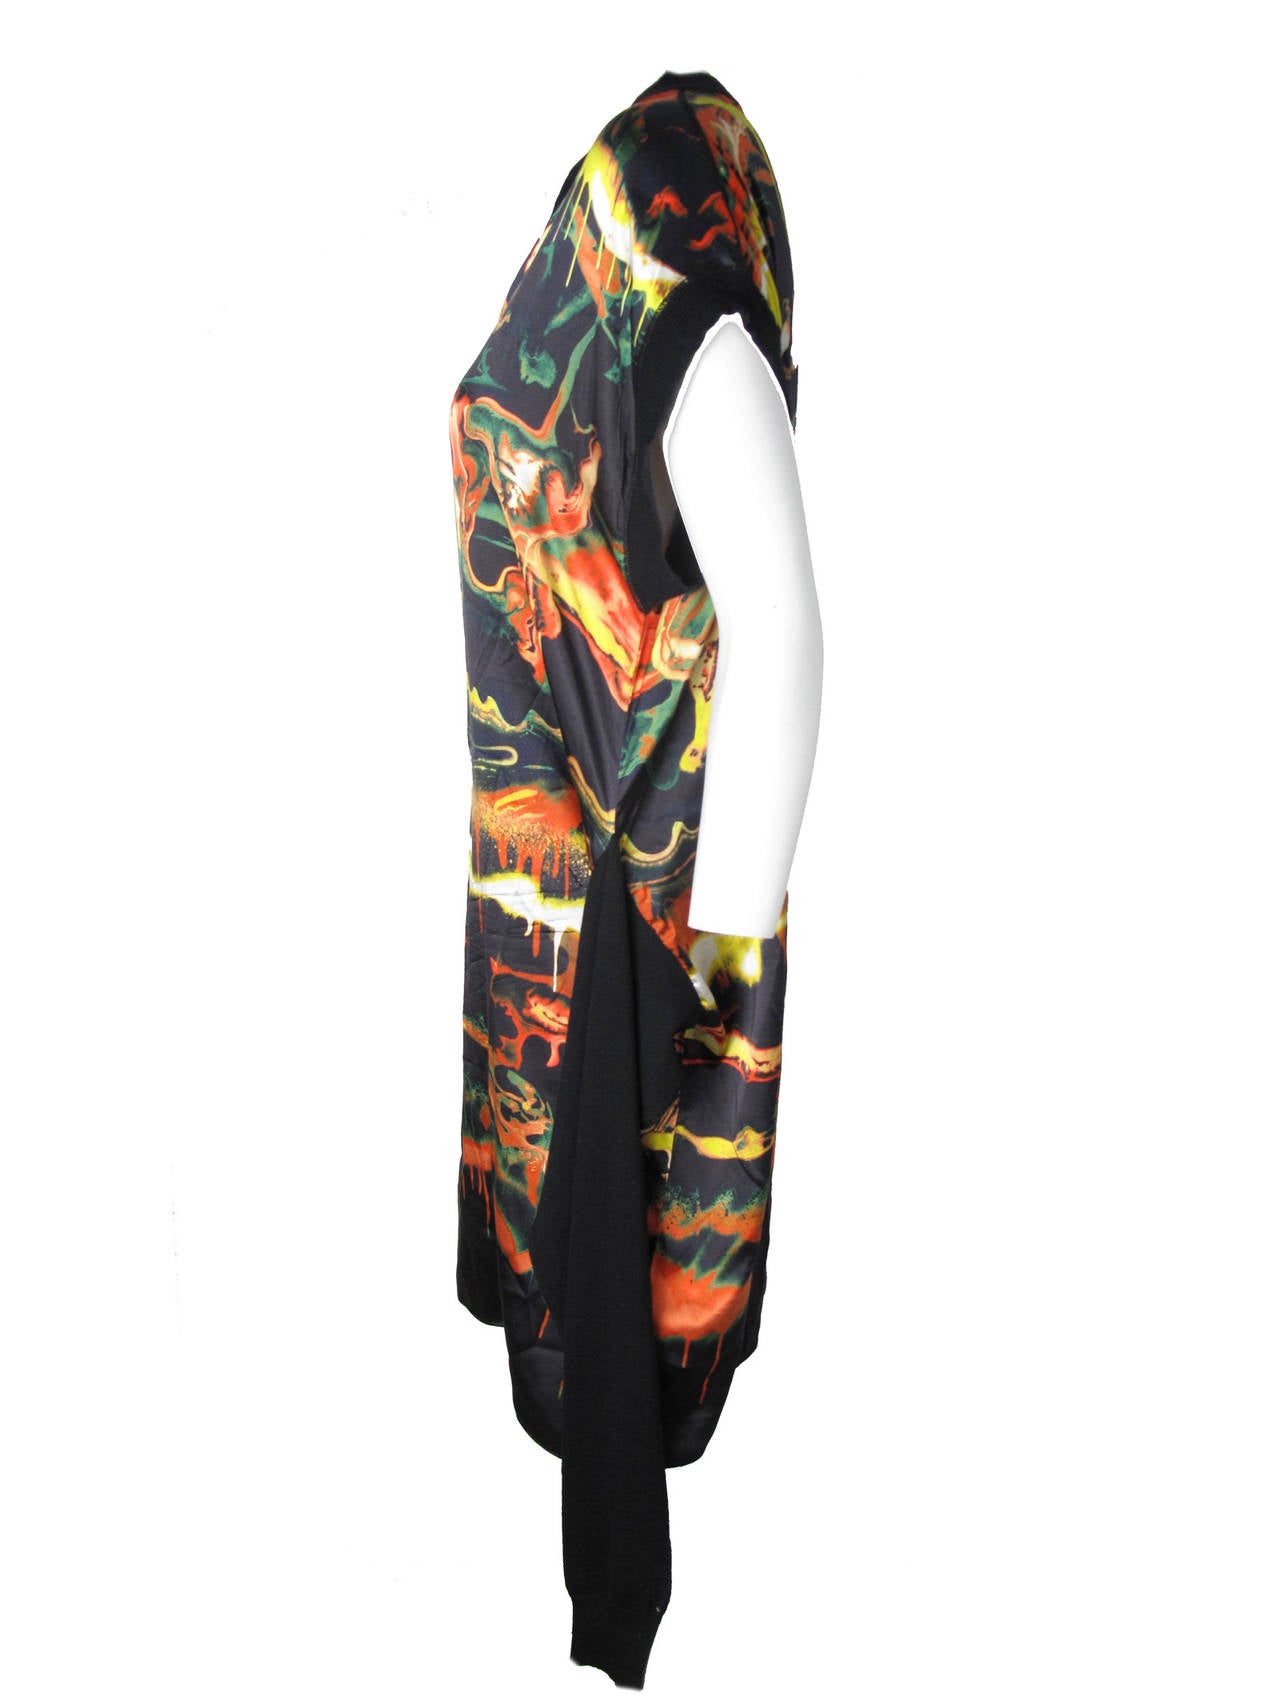 Jean Paul Gaultier Maille Femme silk printed dress with black wool sleeves that hang down.  Can be tied at waist for belt. 44